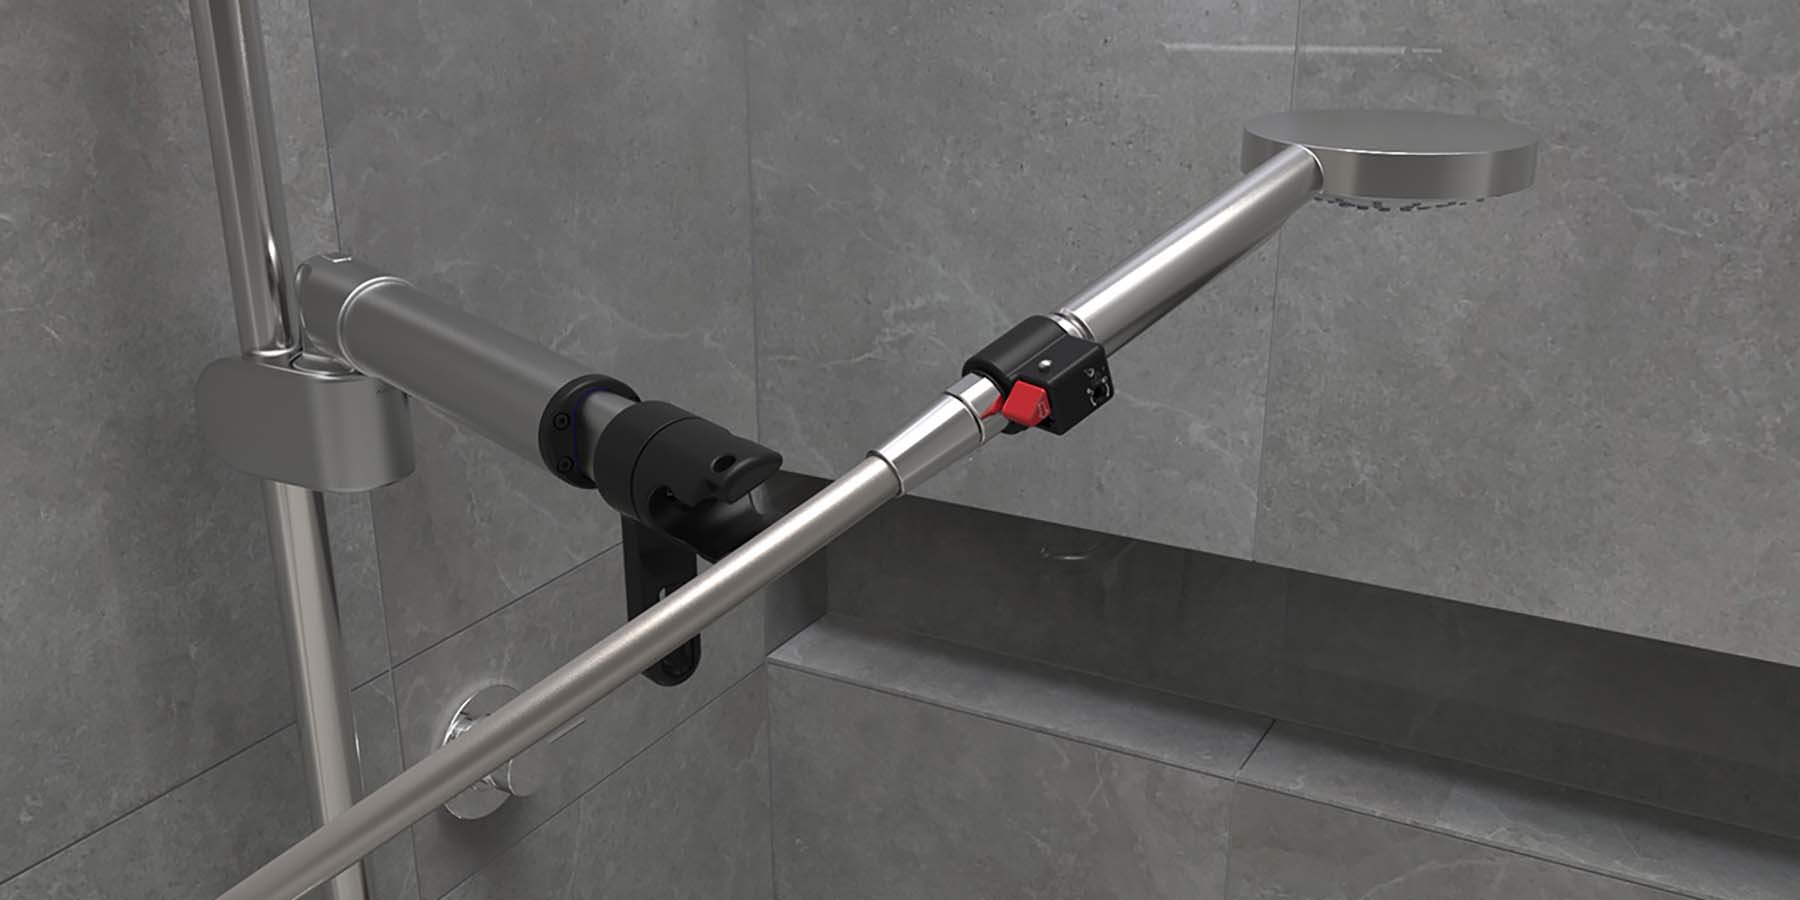 A telescopic shower head holder with the shower head and hose removed from the holder and fitted to the safety adapter